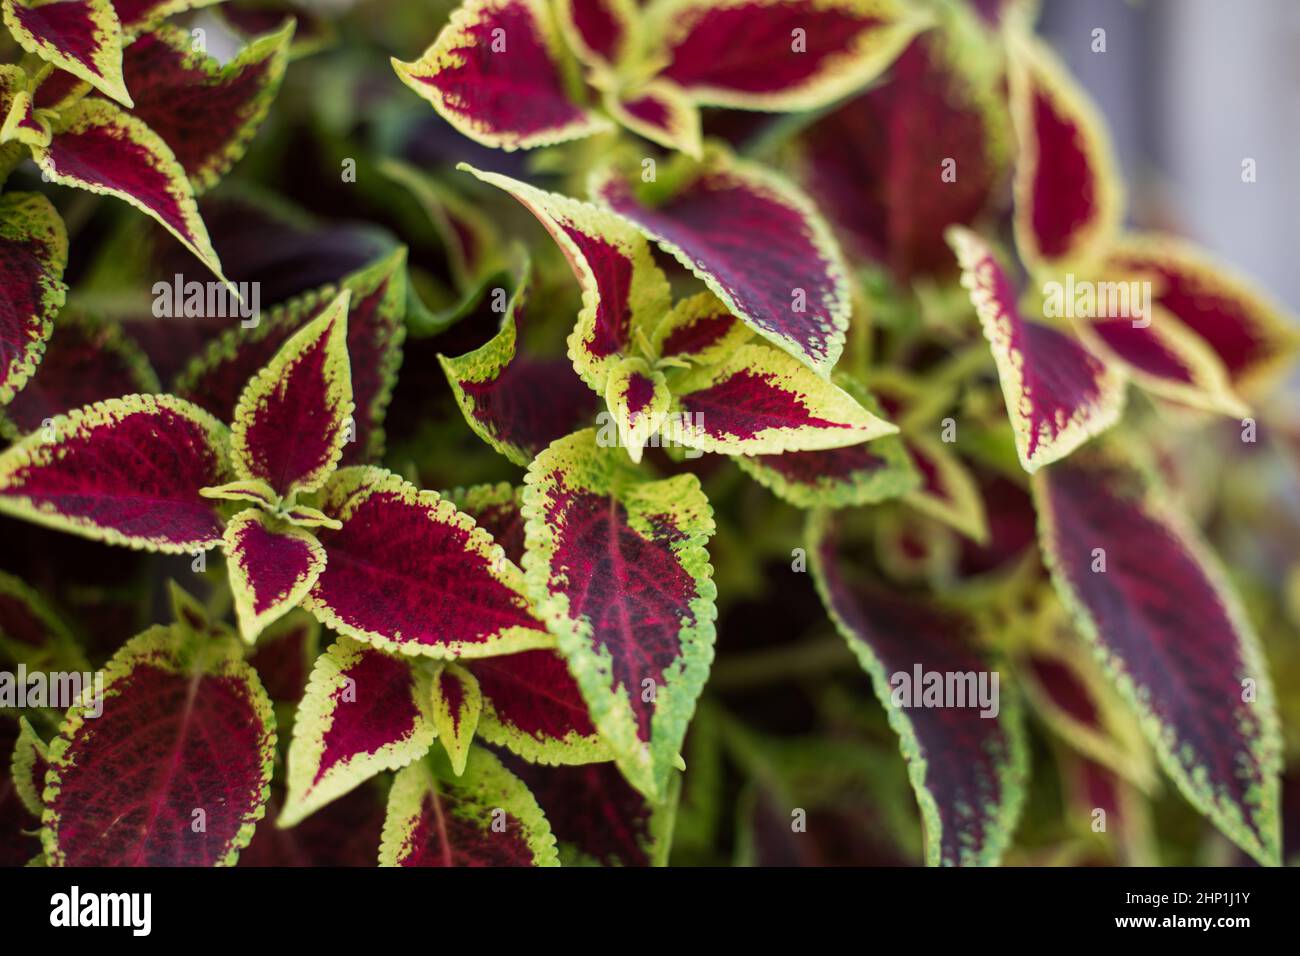 Plectranthus scutellarioides, coleus or Miyana or Miana leaves or in latin Coleus Scutellaricides plant, a traditional herbs remedies. Stock Photo